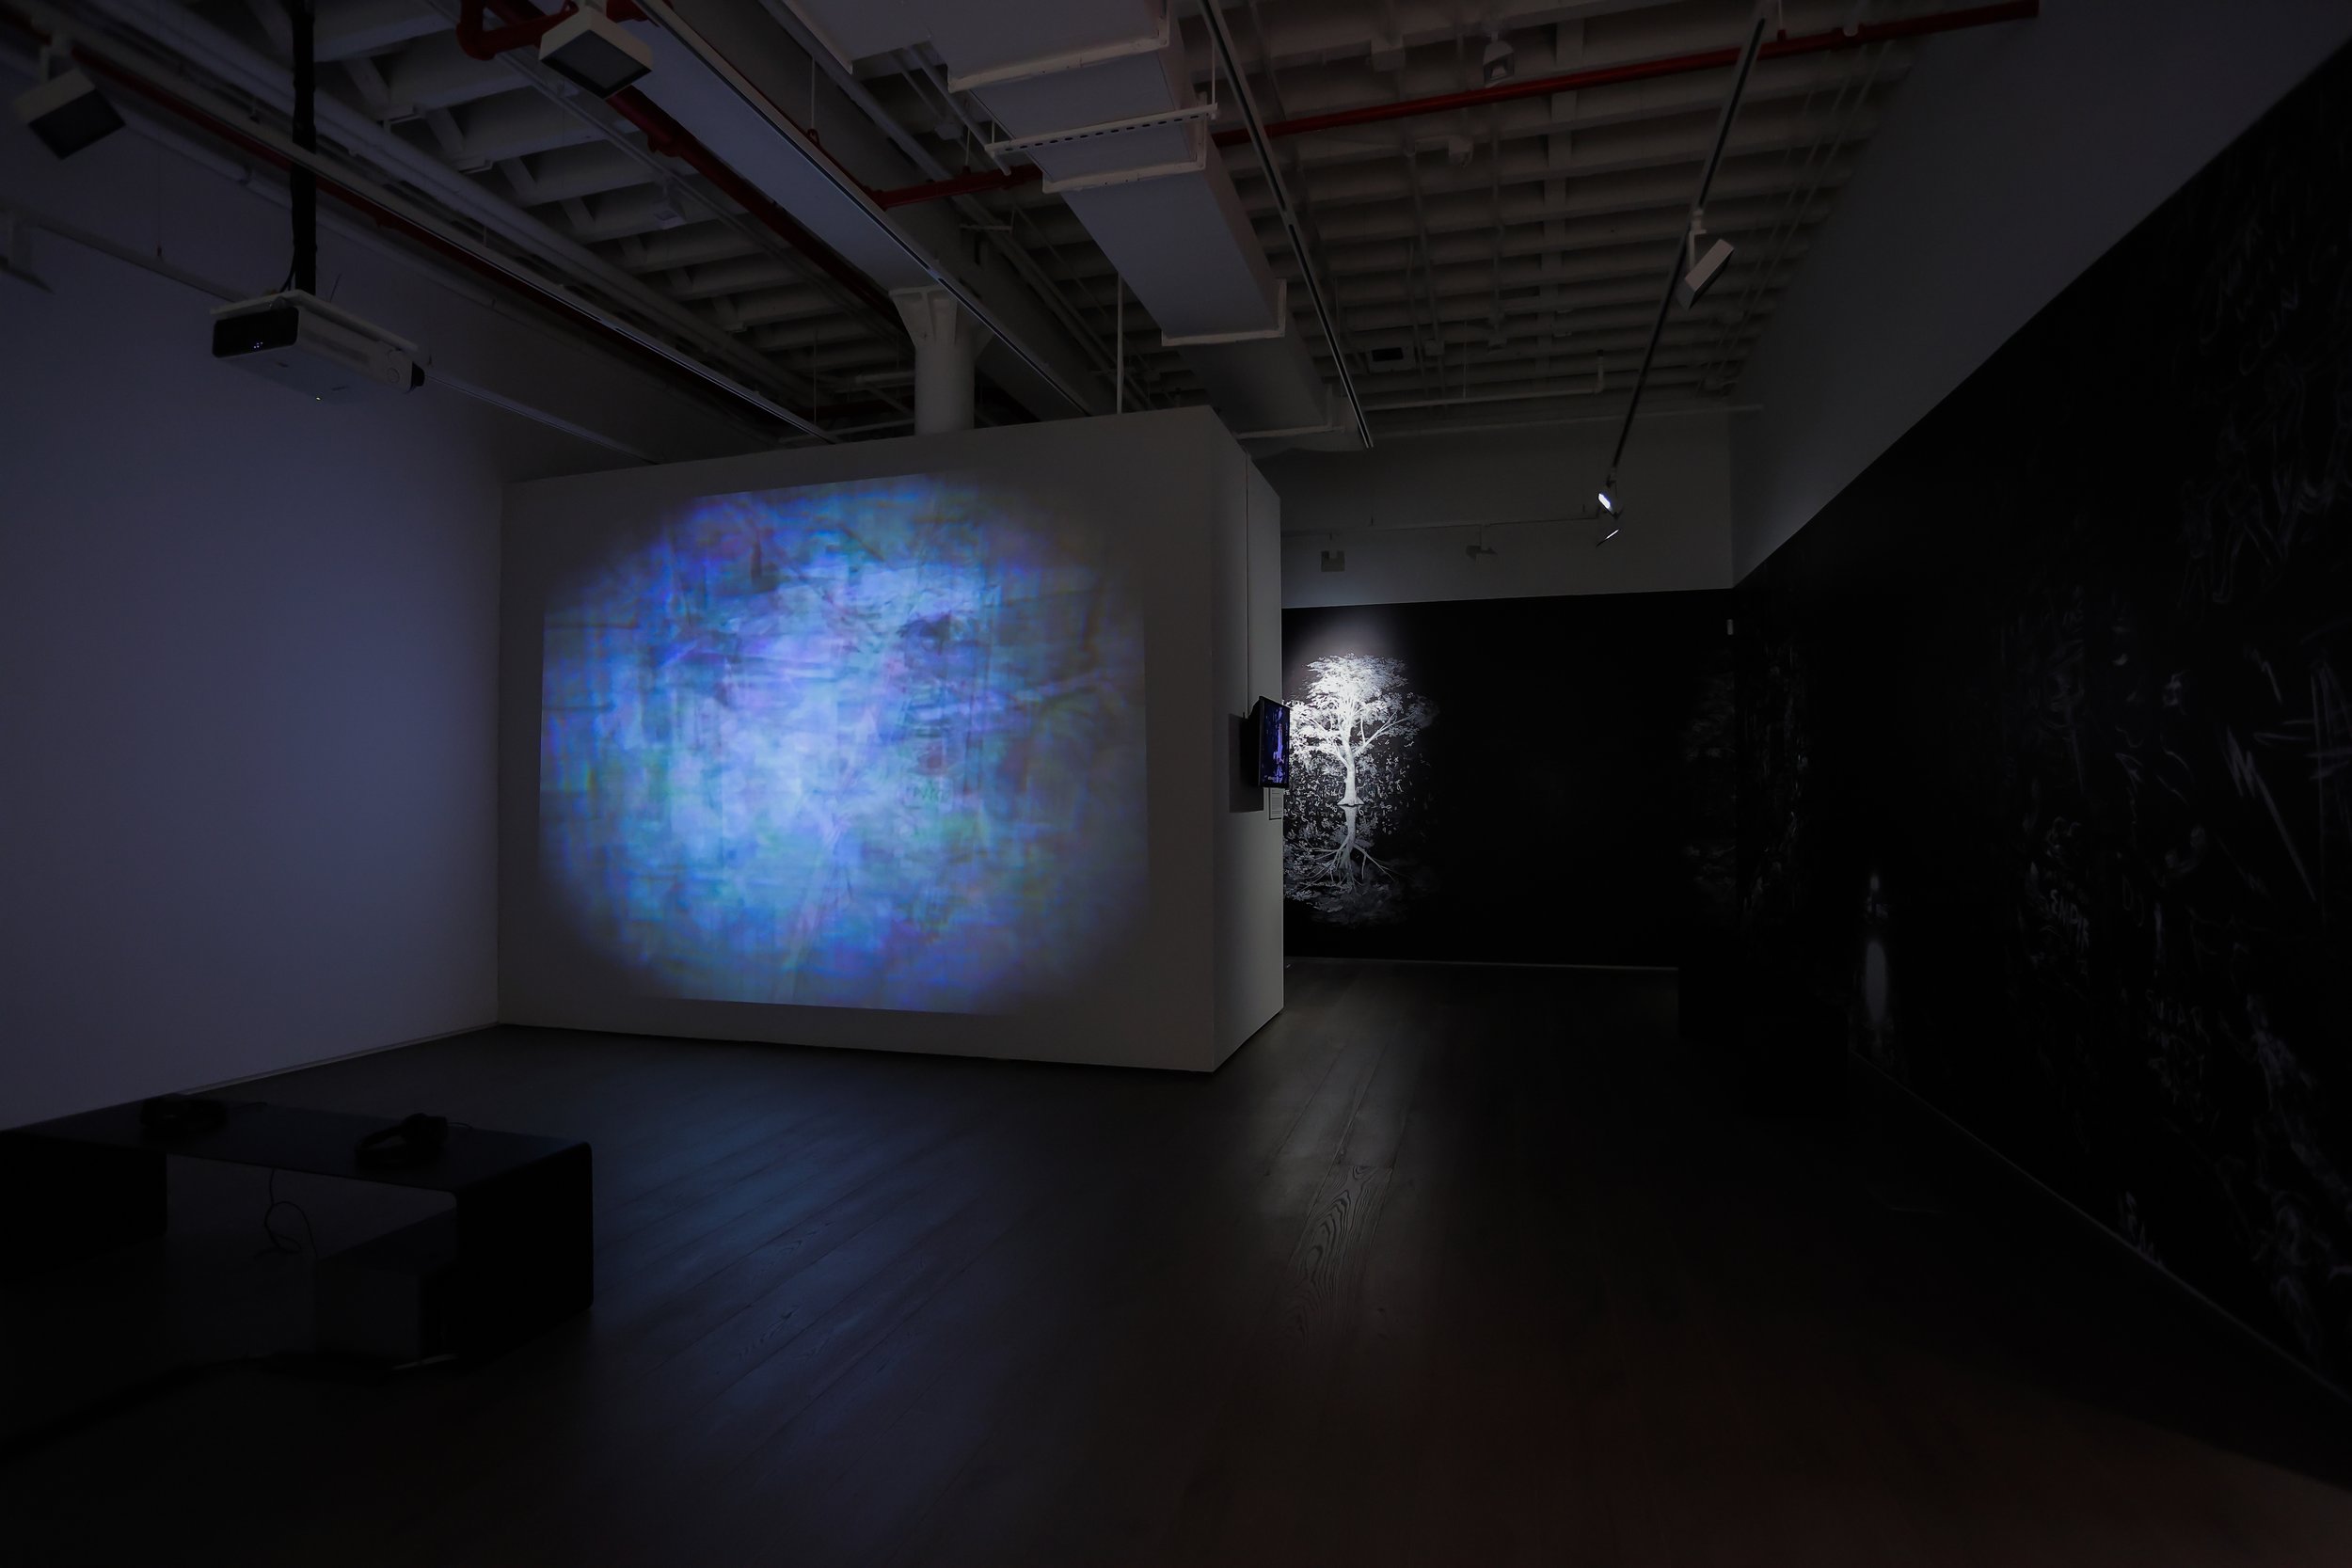   Hsin-Chien Huang: The Data We Called Home  installation view, photo by the artist’s studio. ©Hsin-Chien Huang, Courtesy of Fou Gallery 